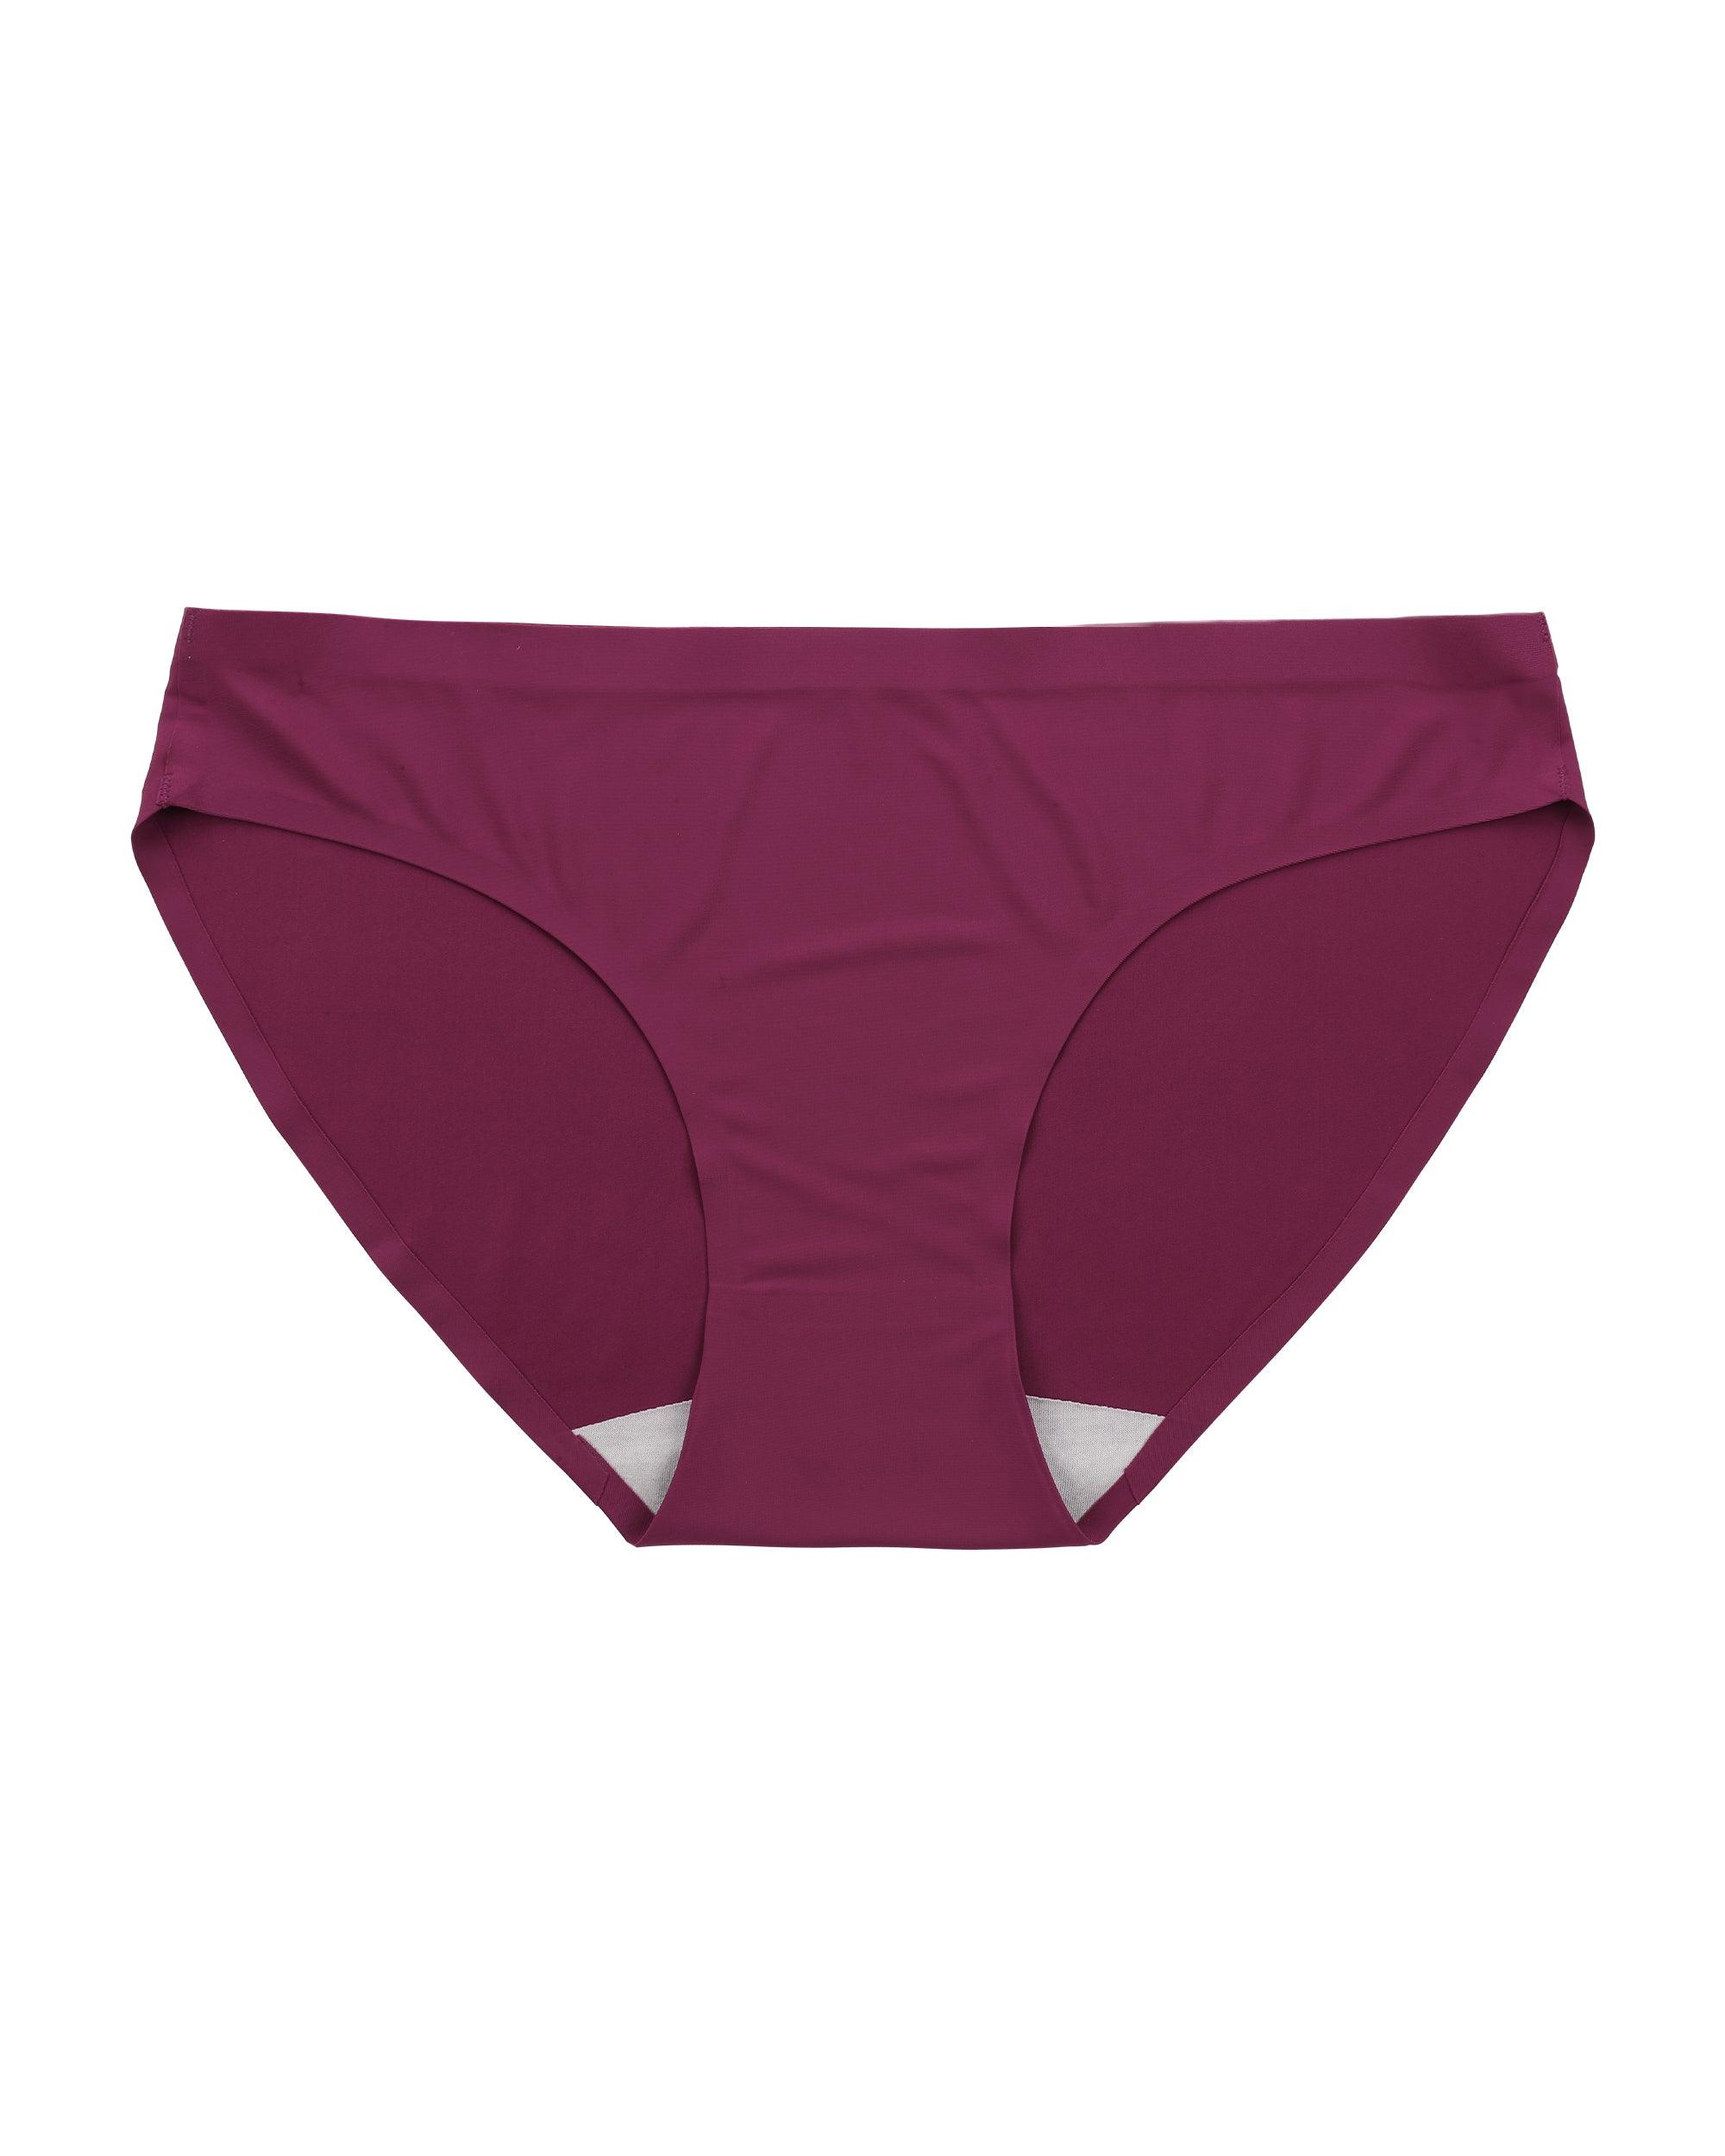 ALTHEANRAY Women’s Seamless Hipster